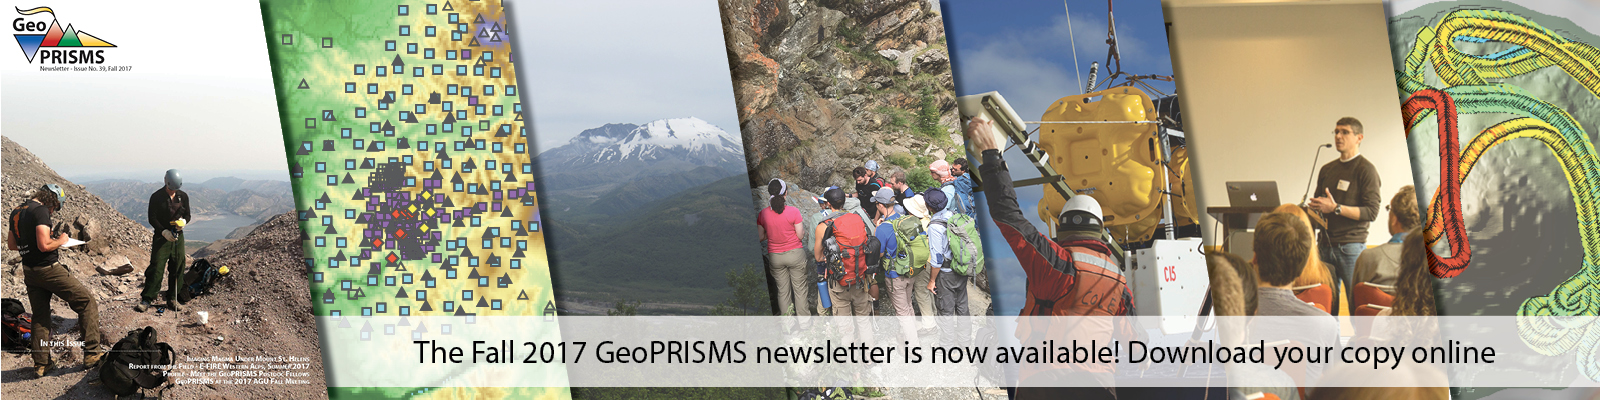 GeoPRISMS Newsletter Fall 2017 Issue 39